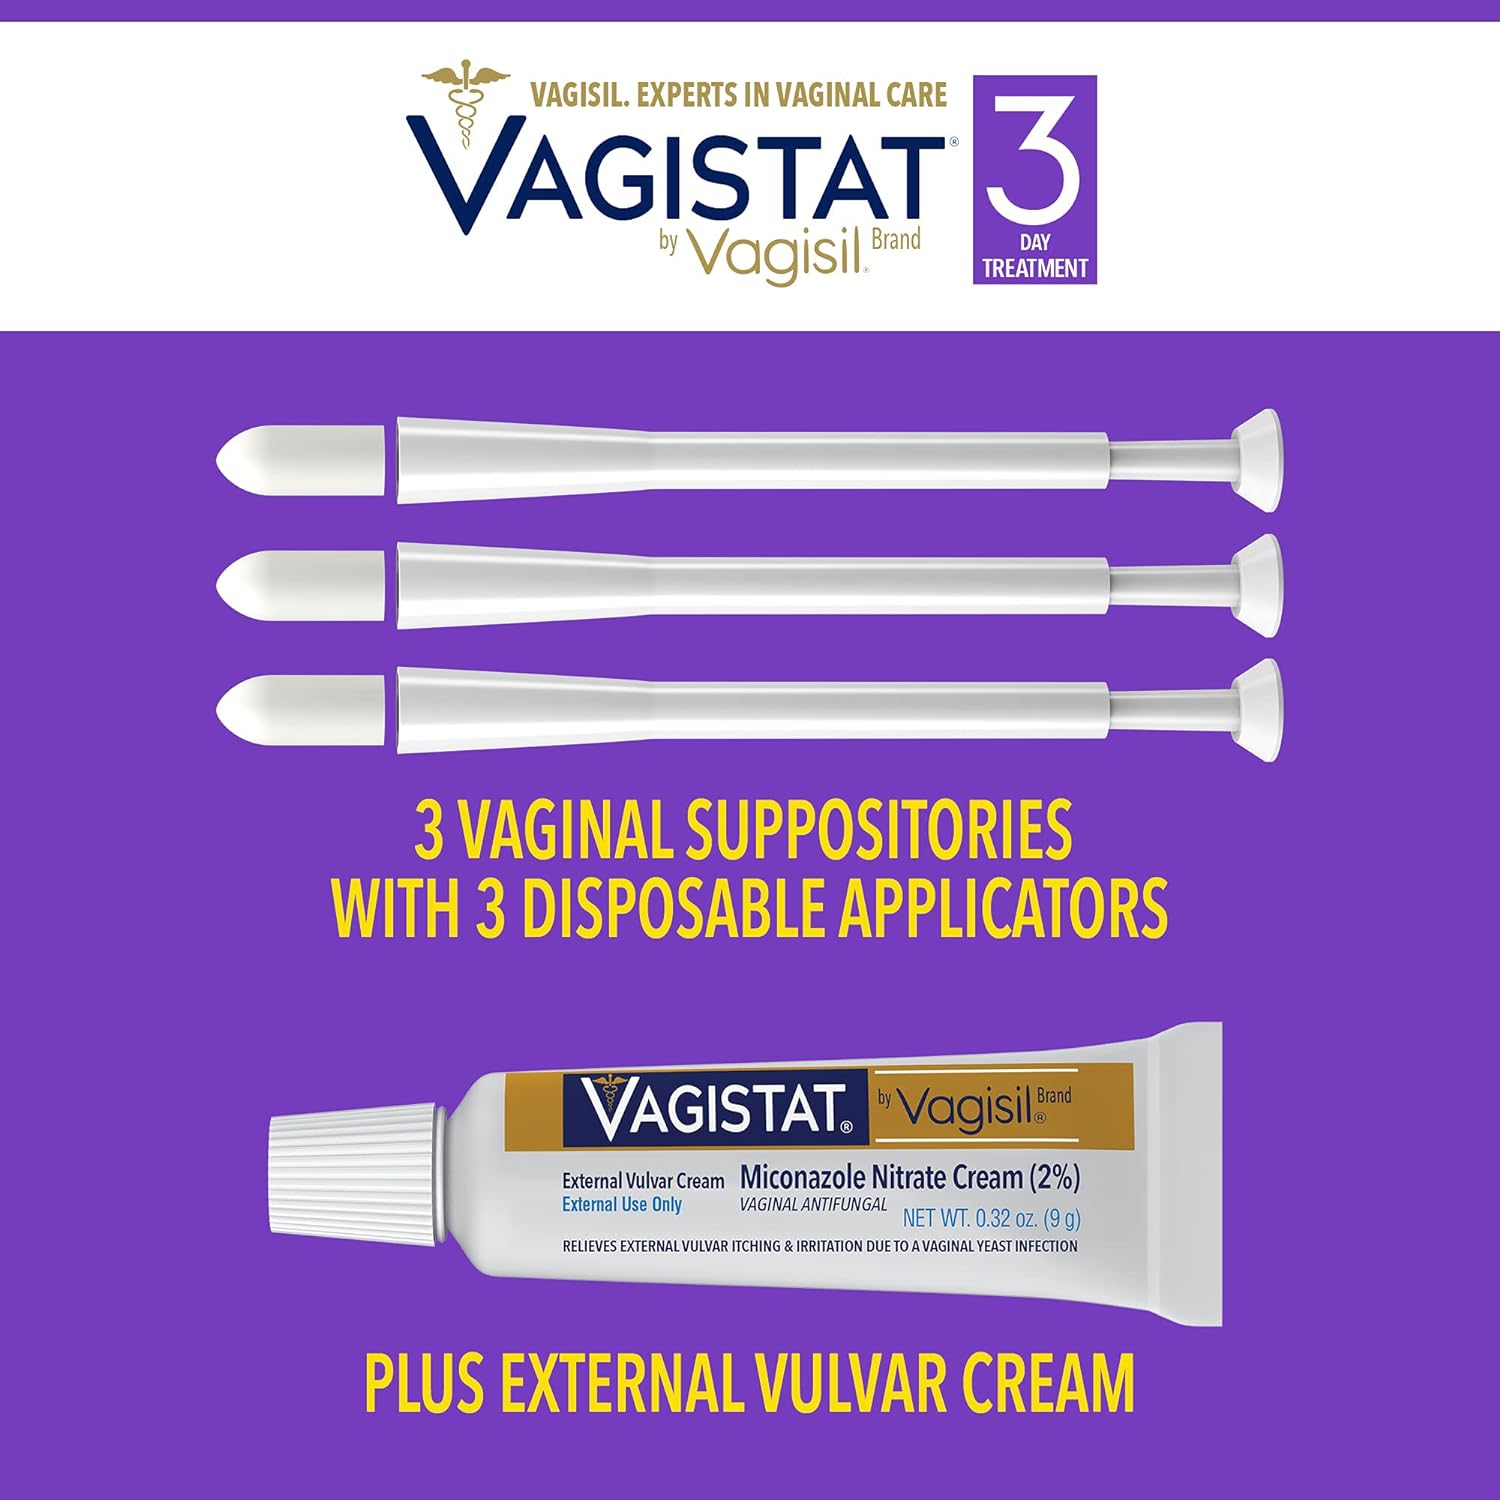 Vagistat 3 Day Yeast Infection Treatment for Women, Relieves External Itching and Irritation - 2% External Miconazole Nitrate Cream, 3 Disposable Suppositories & Applicators, by Vagisil (Pack of 1) : Health & Household